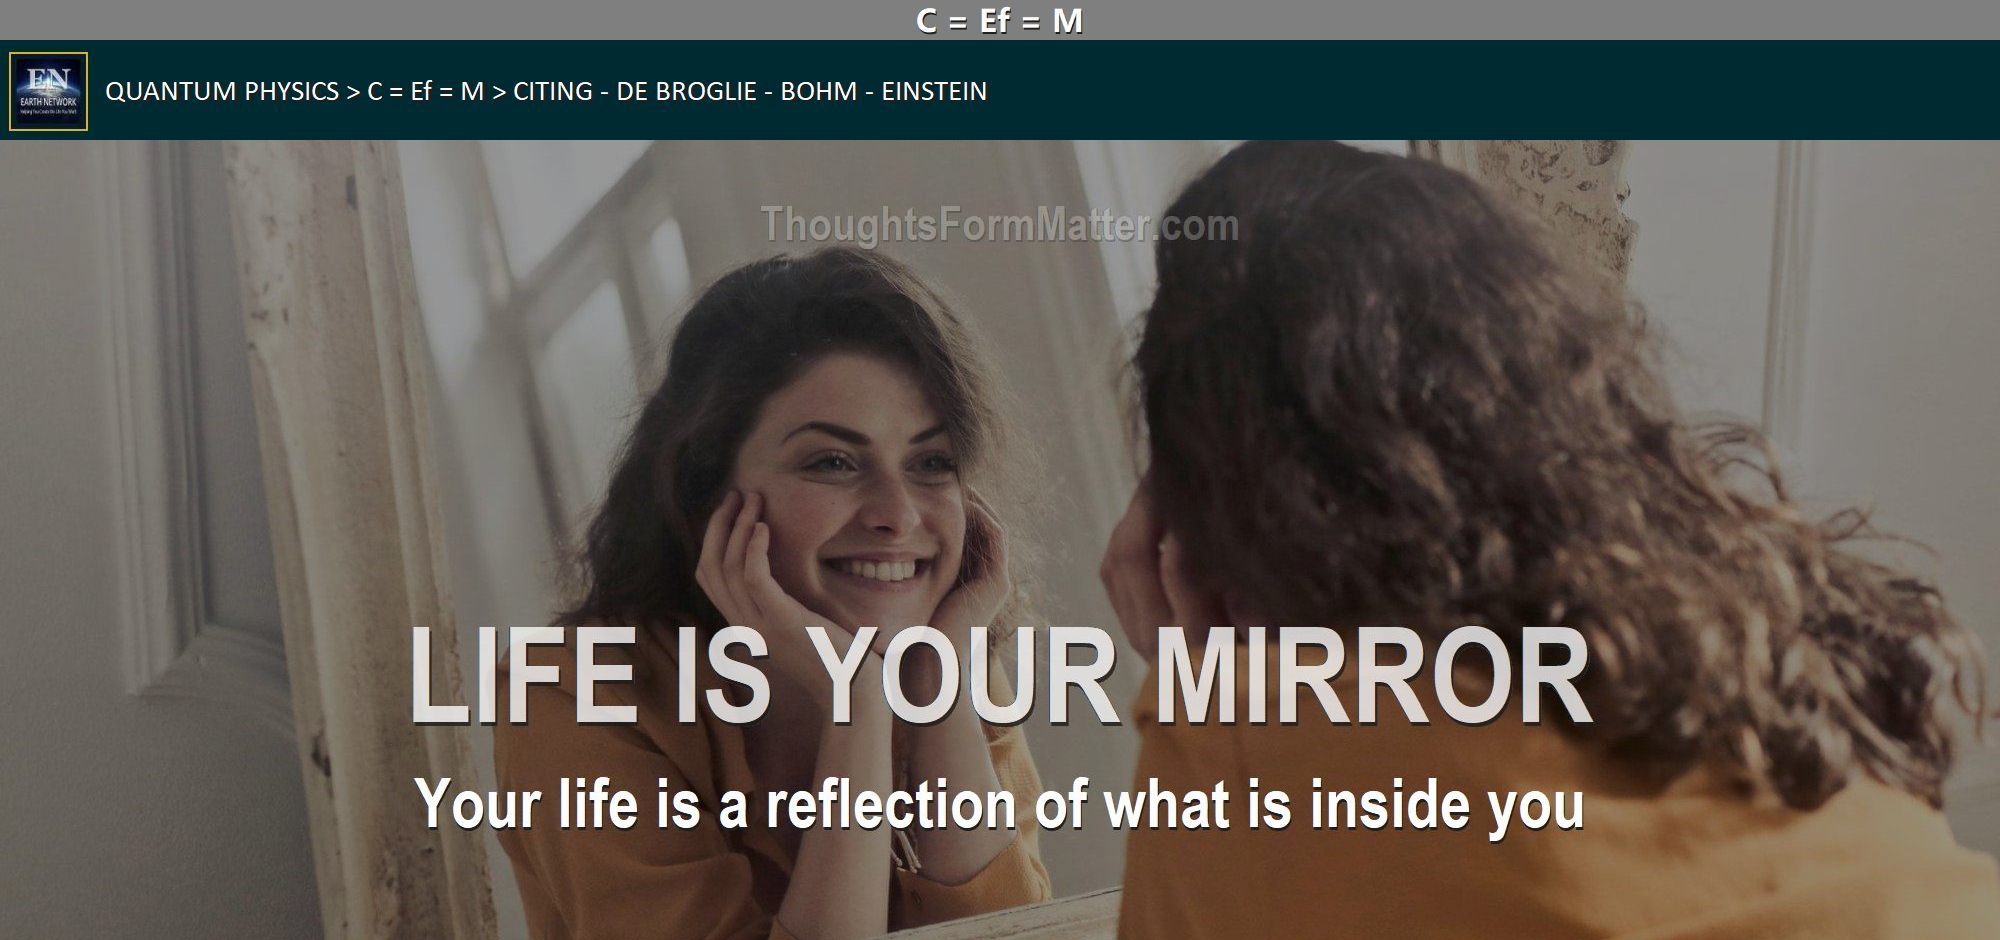 woman-looking-in-mirror-realizes-that-the-world-is-your-mirror-meaning-life-is-a-holographic-projection-reflection-of-her-thoughts-beliefs